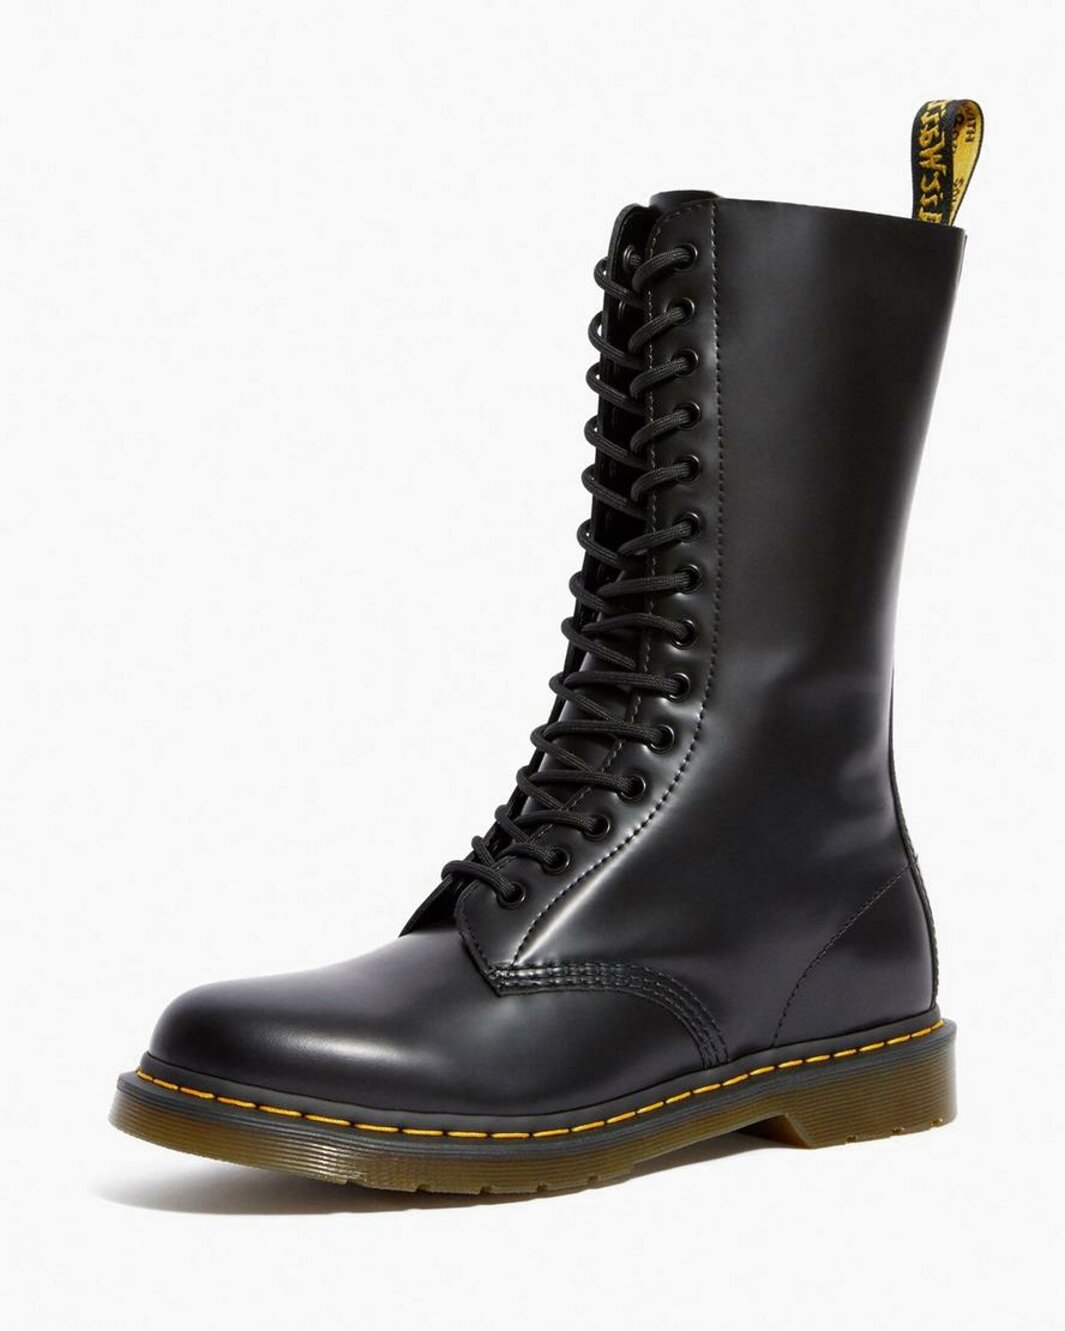 Dr Martens 14 Hole for sale in UK | 66 used Dr Martens 14 Holes